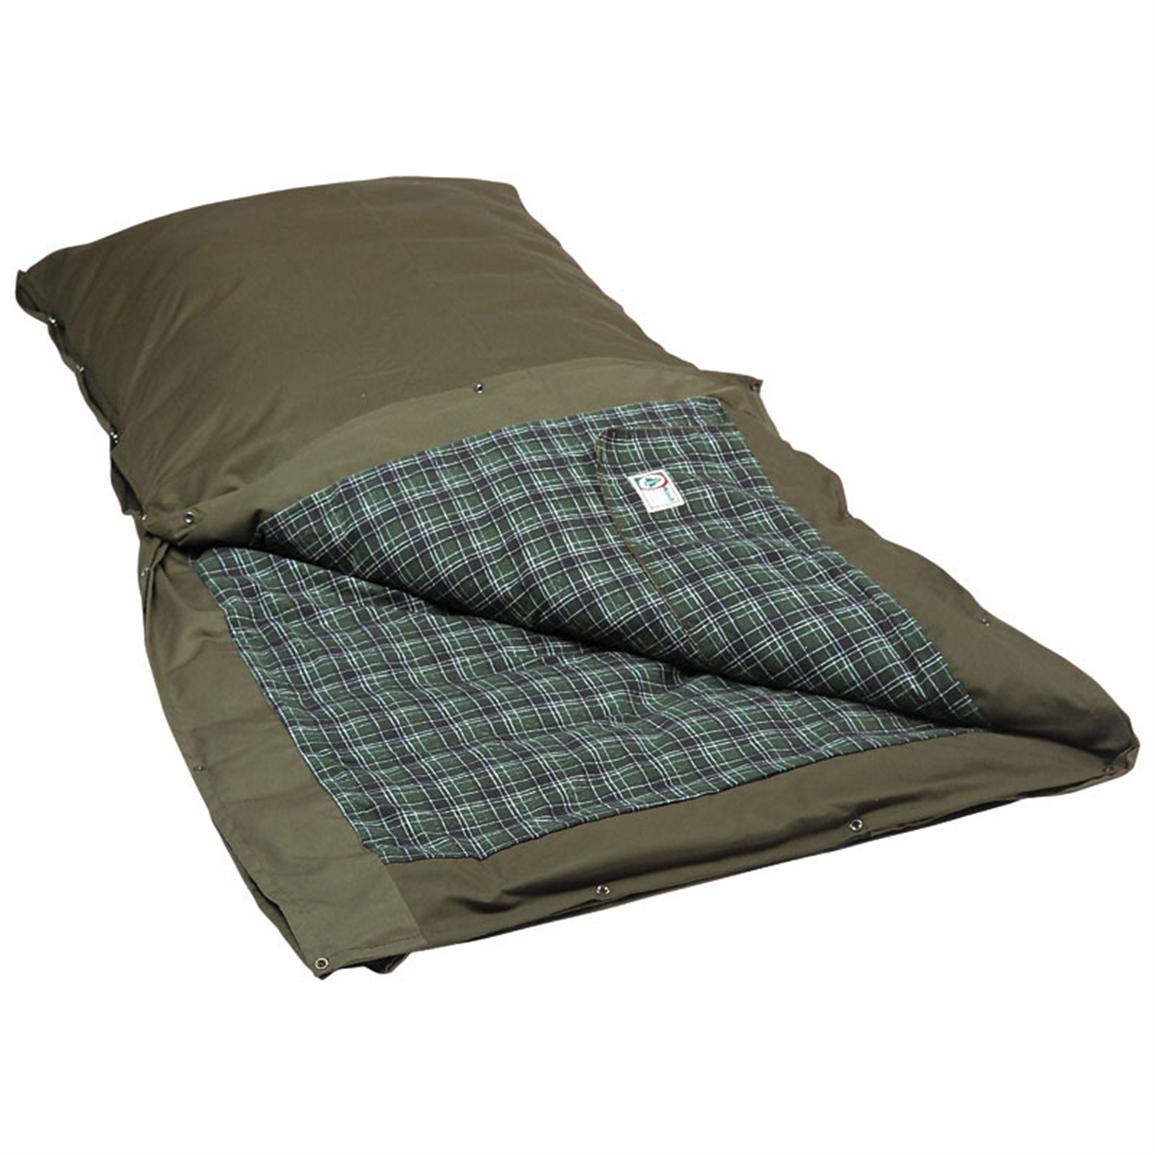 Woods® Canada Arctic Series Arctic 2 Star Sleeping Bag - 79437, at Sportsman's Guide1155 x 1155